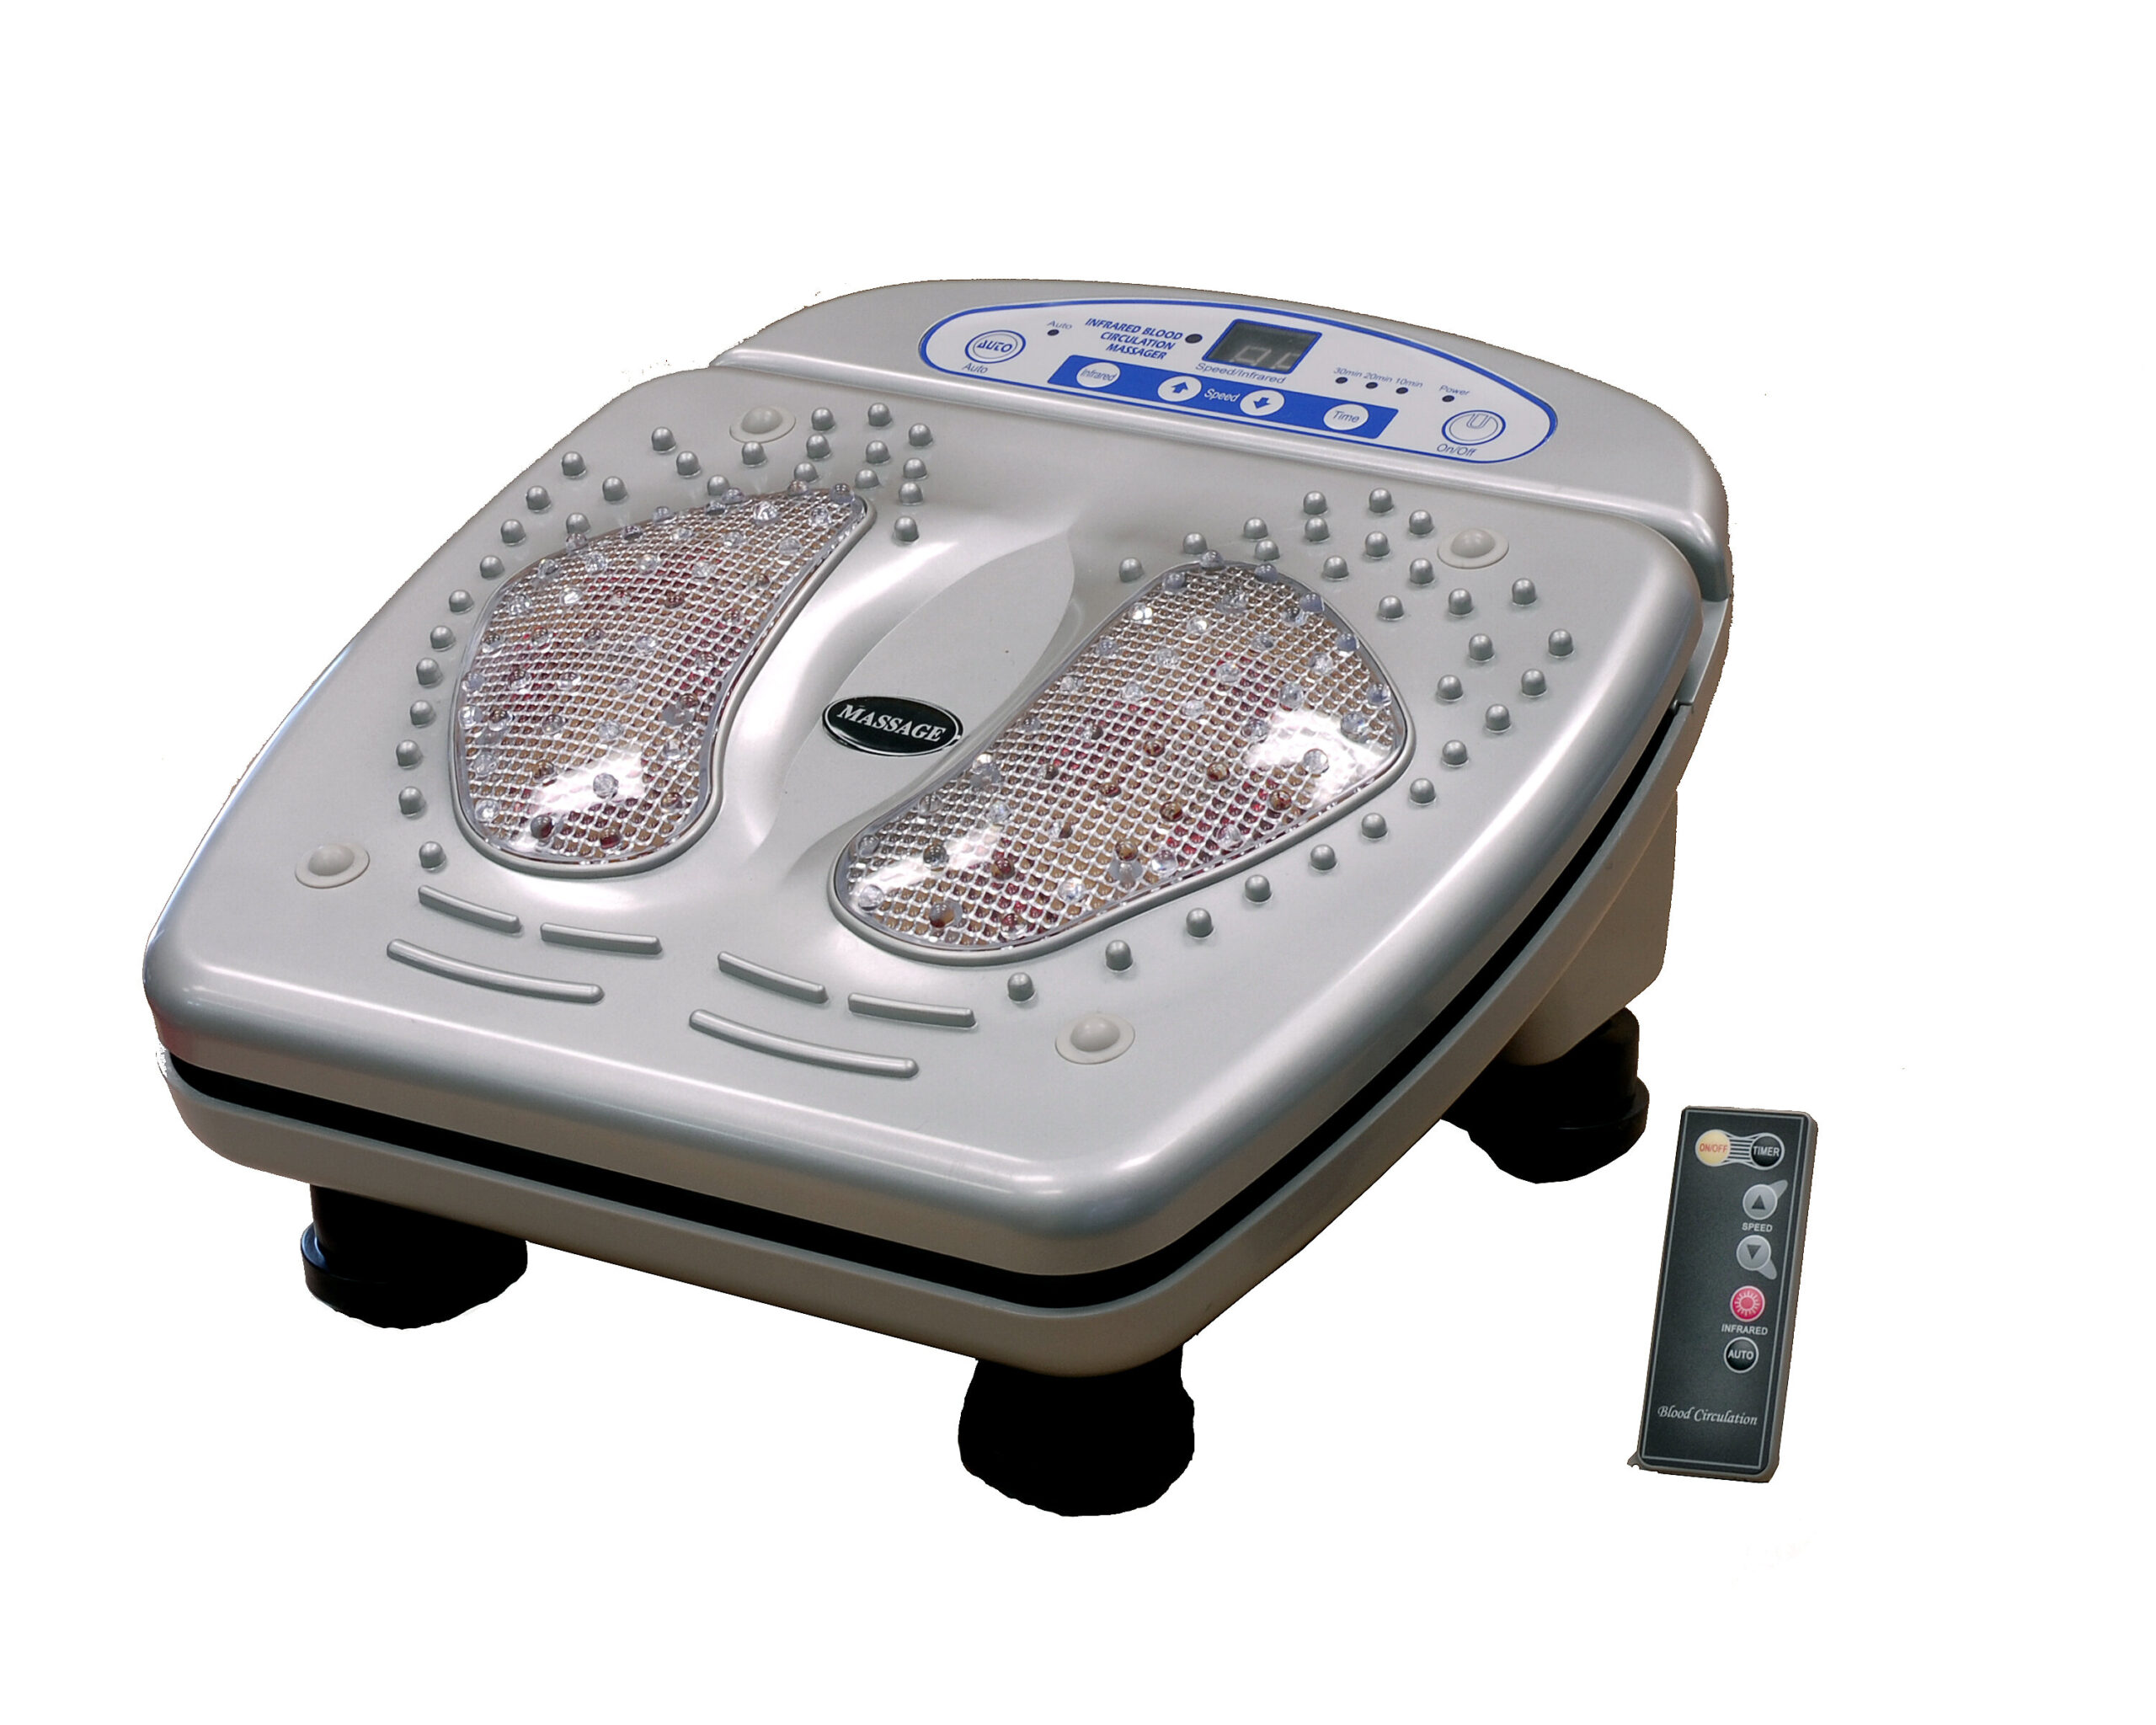 https://tvconlineshop.com/wp-content/uploads/2021/09/infrared-and-vibration-foot-massager-scaled.jpg